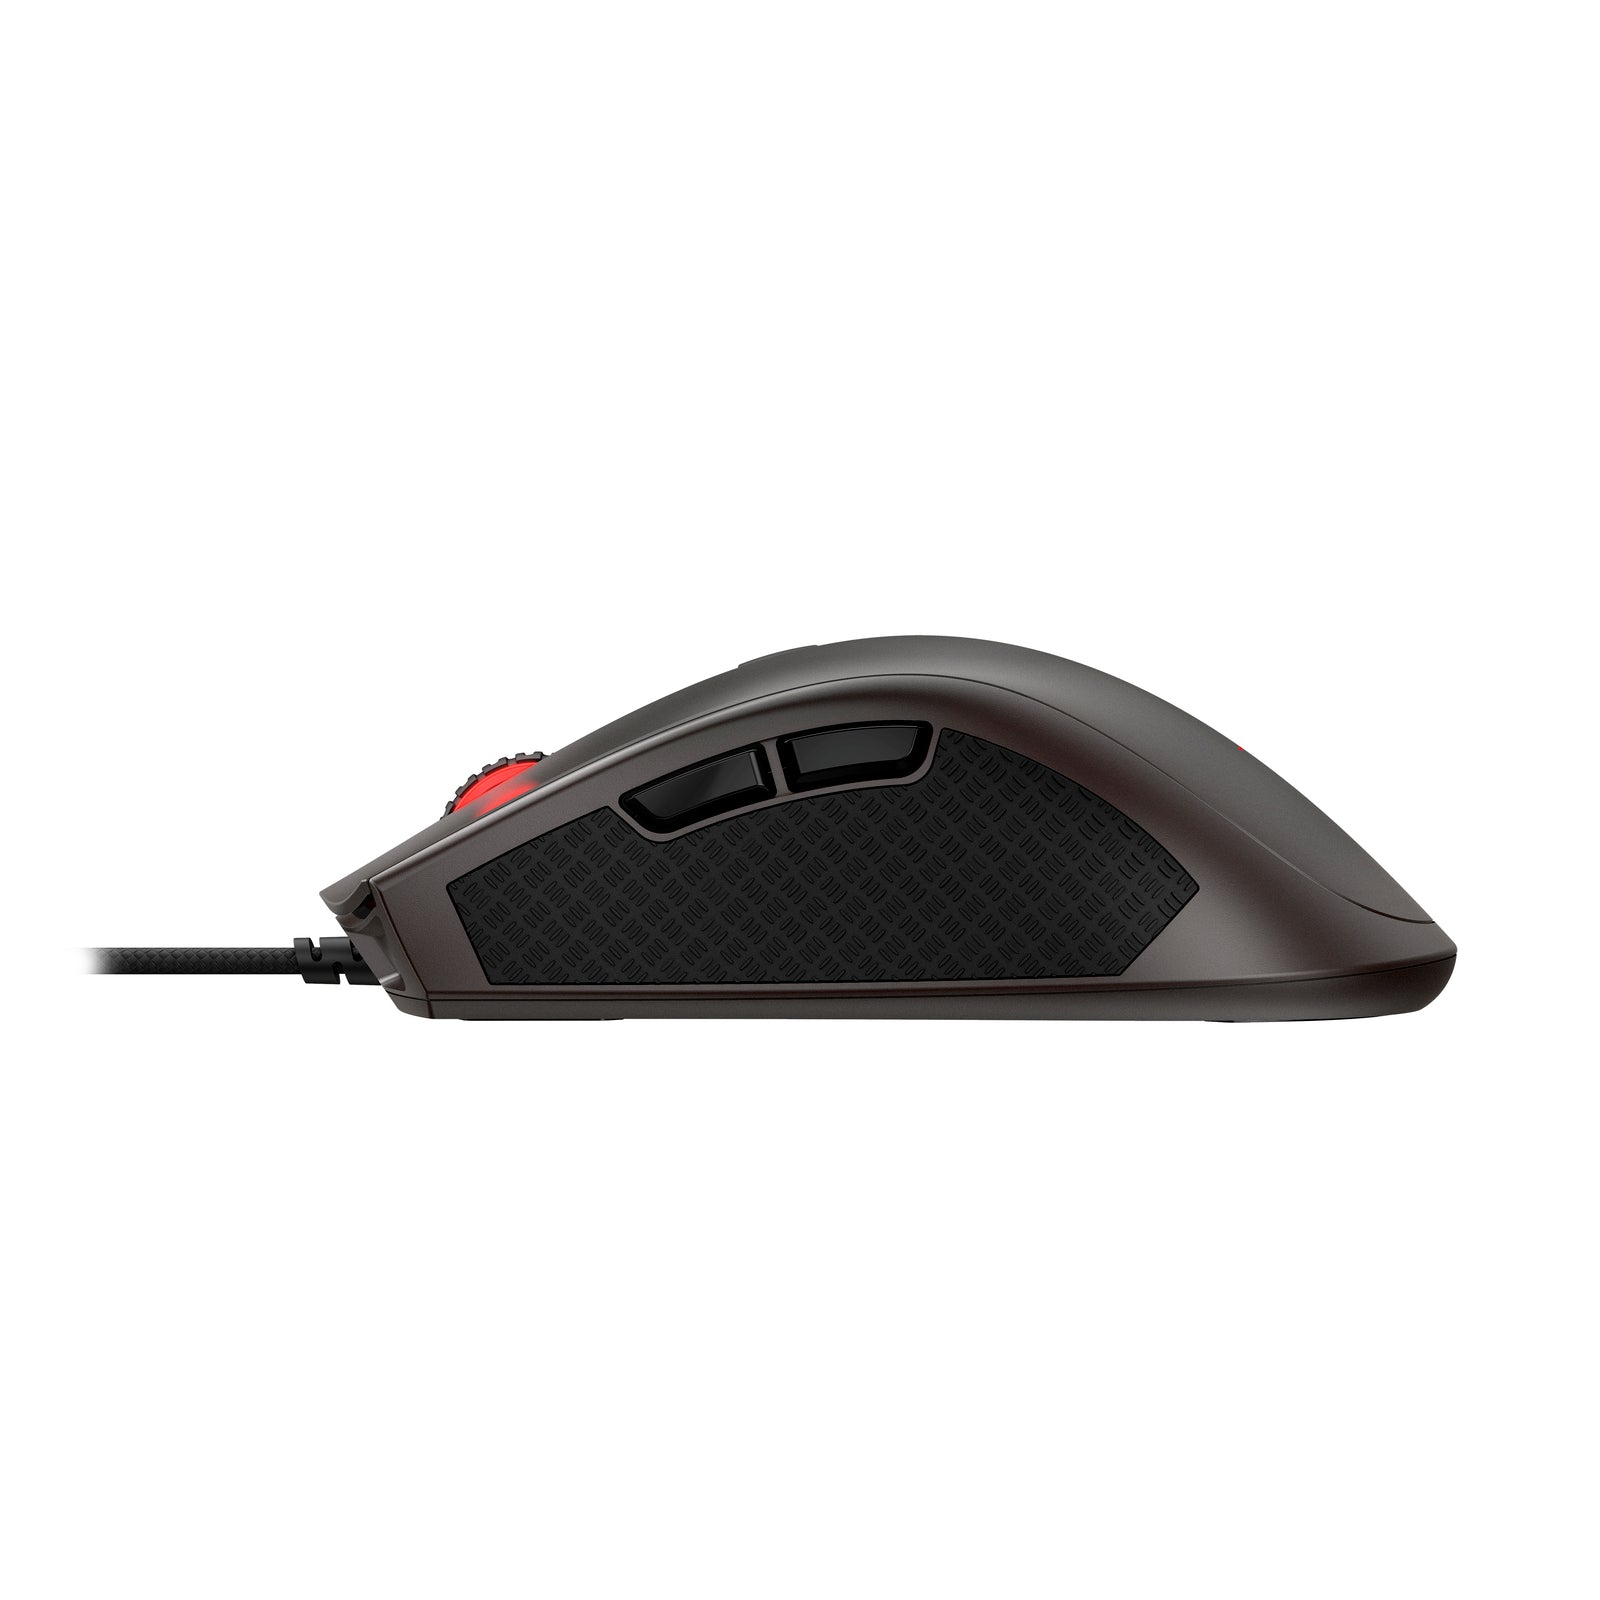 HyperX Pulsefire FPS Pro - Gaming Mouse